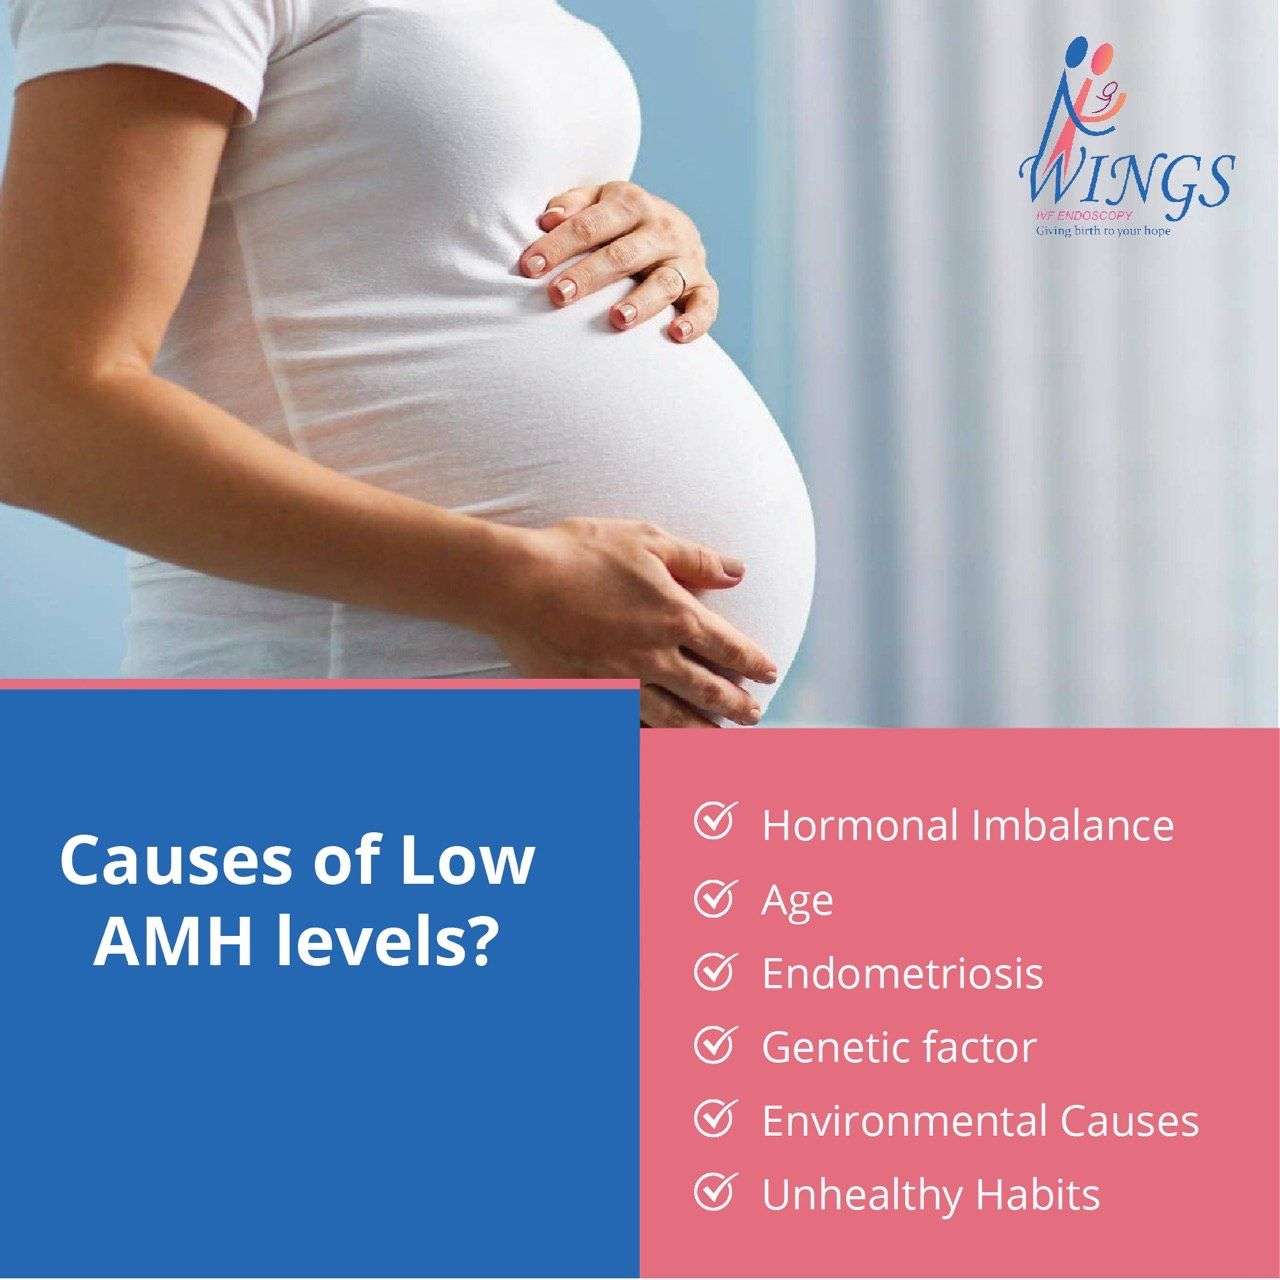 Causes of Low AMH levels?